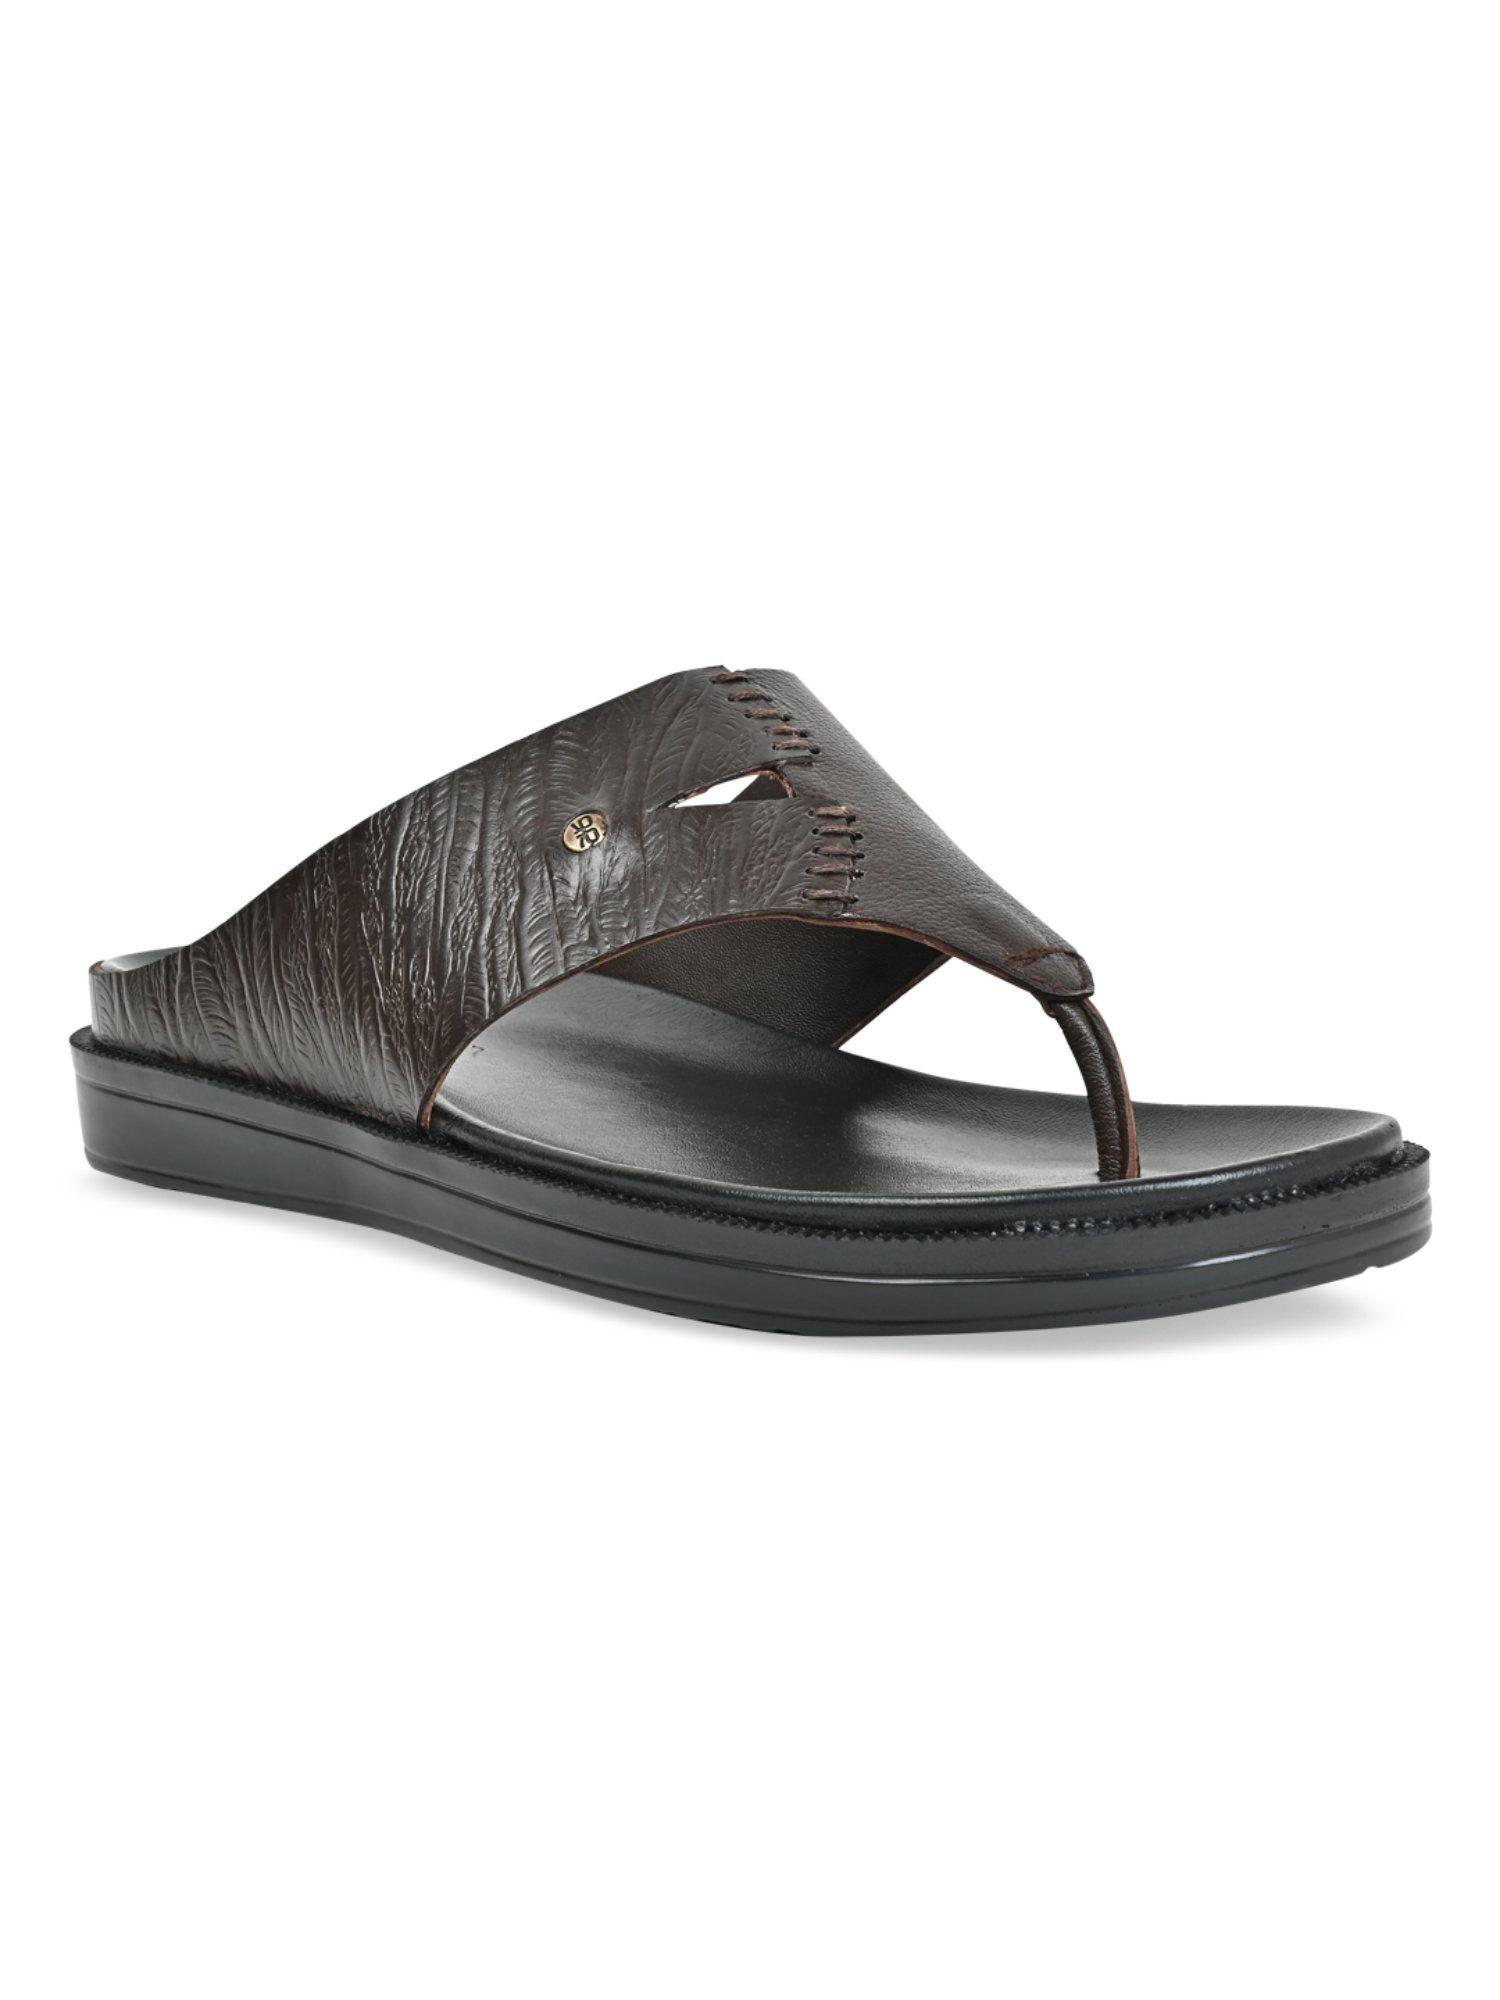 Brown Men Casual Textured Leather Sandals